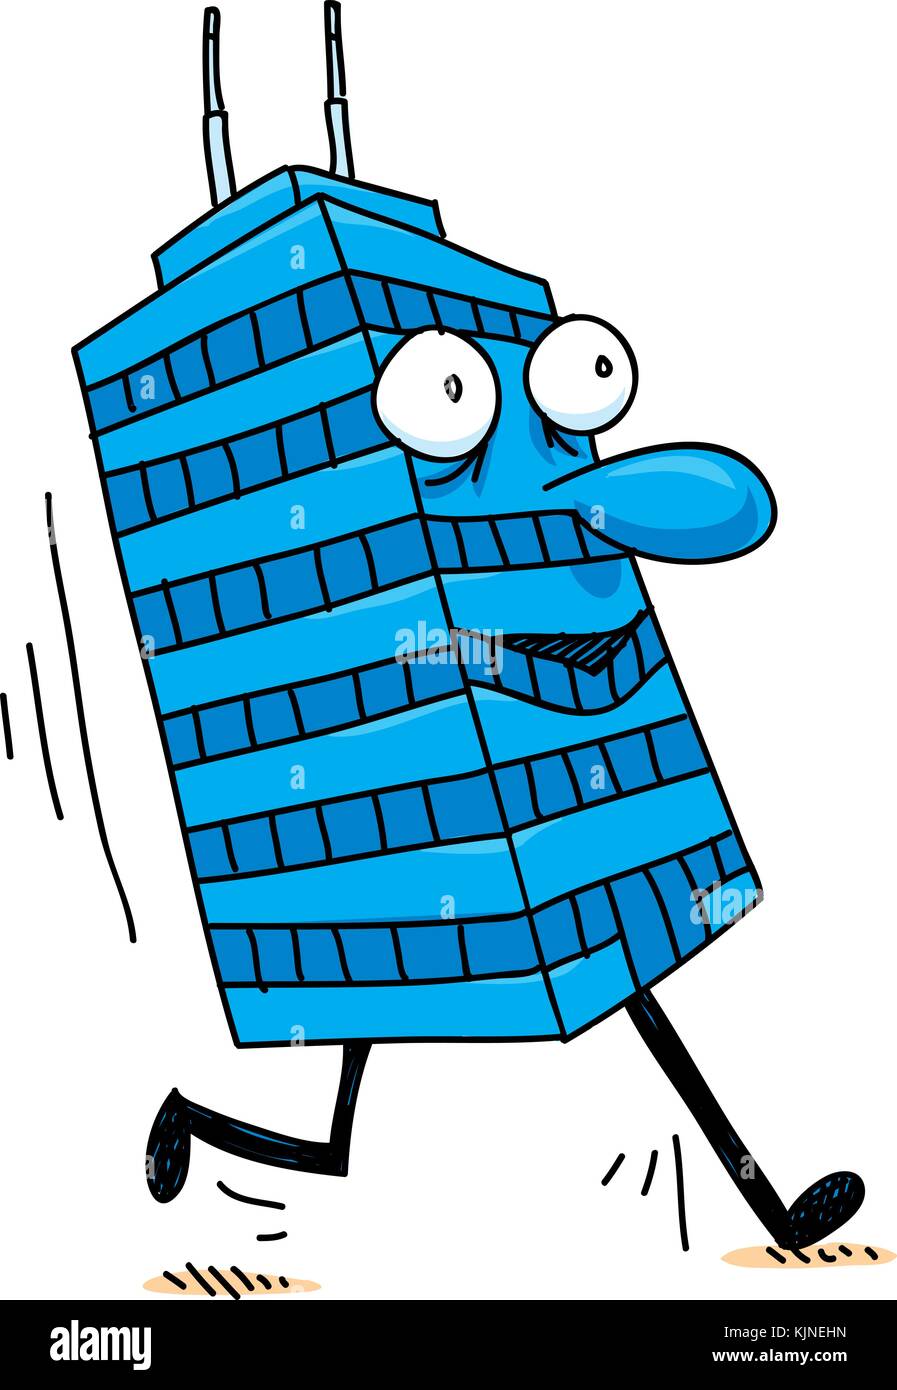 A happy, cartoon office tower character going for a brisk walk. Stock Vector